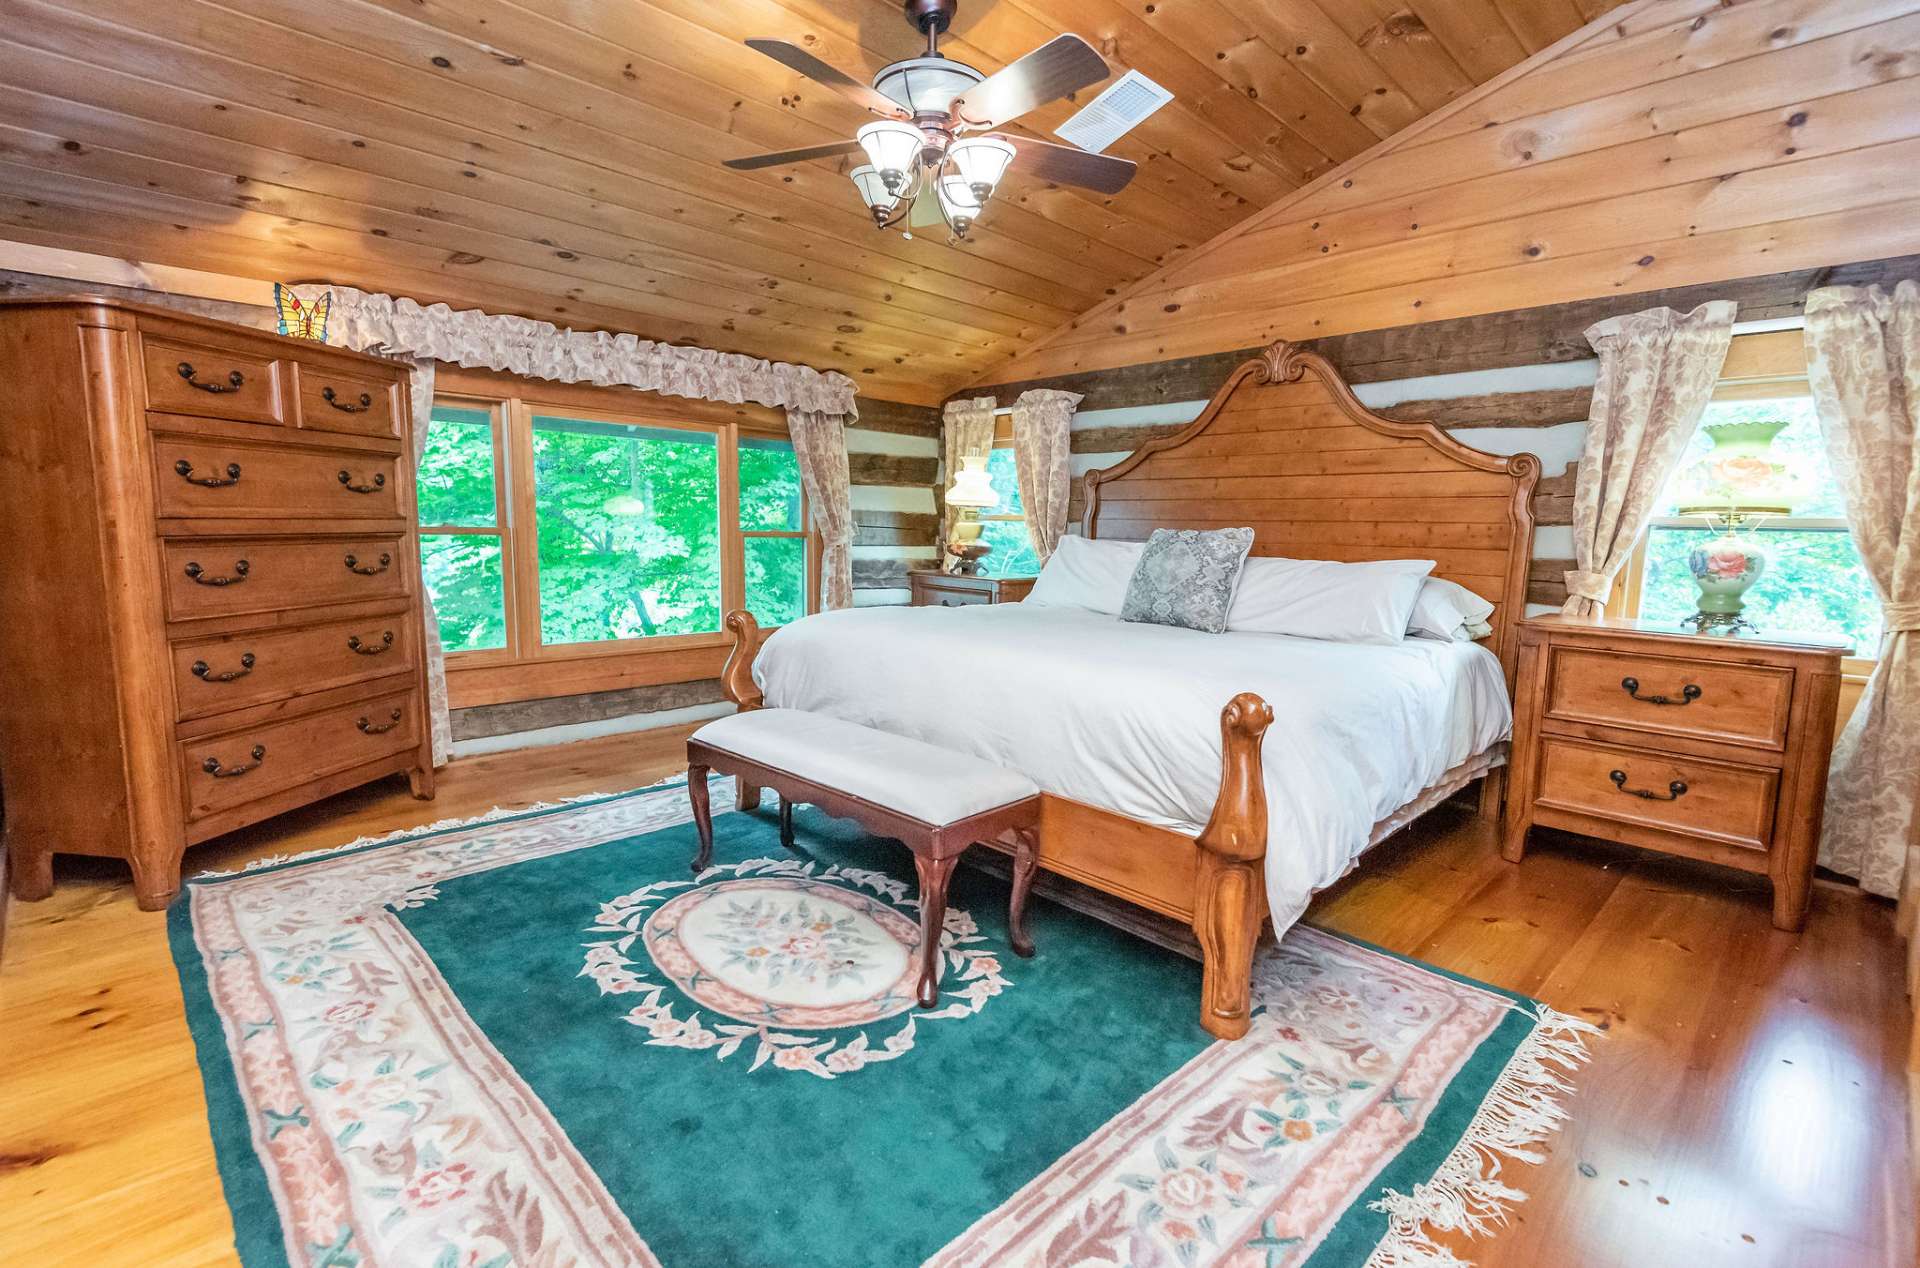 Your guests won't want to get out of the bed when staying in this gorgeous room with a view.